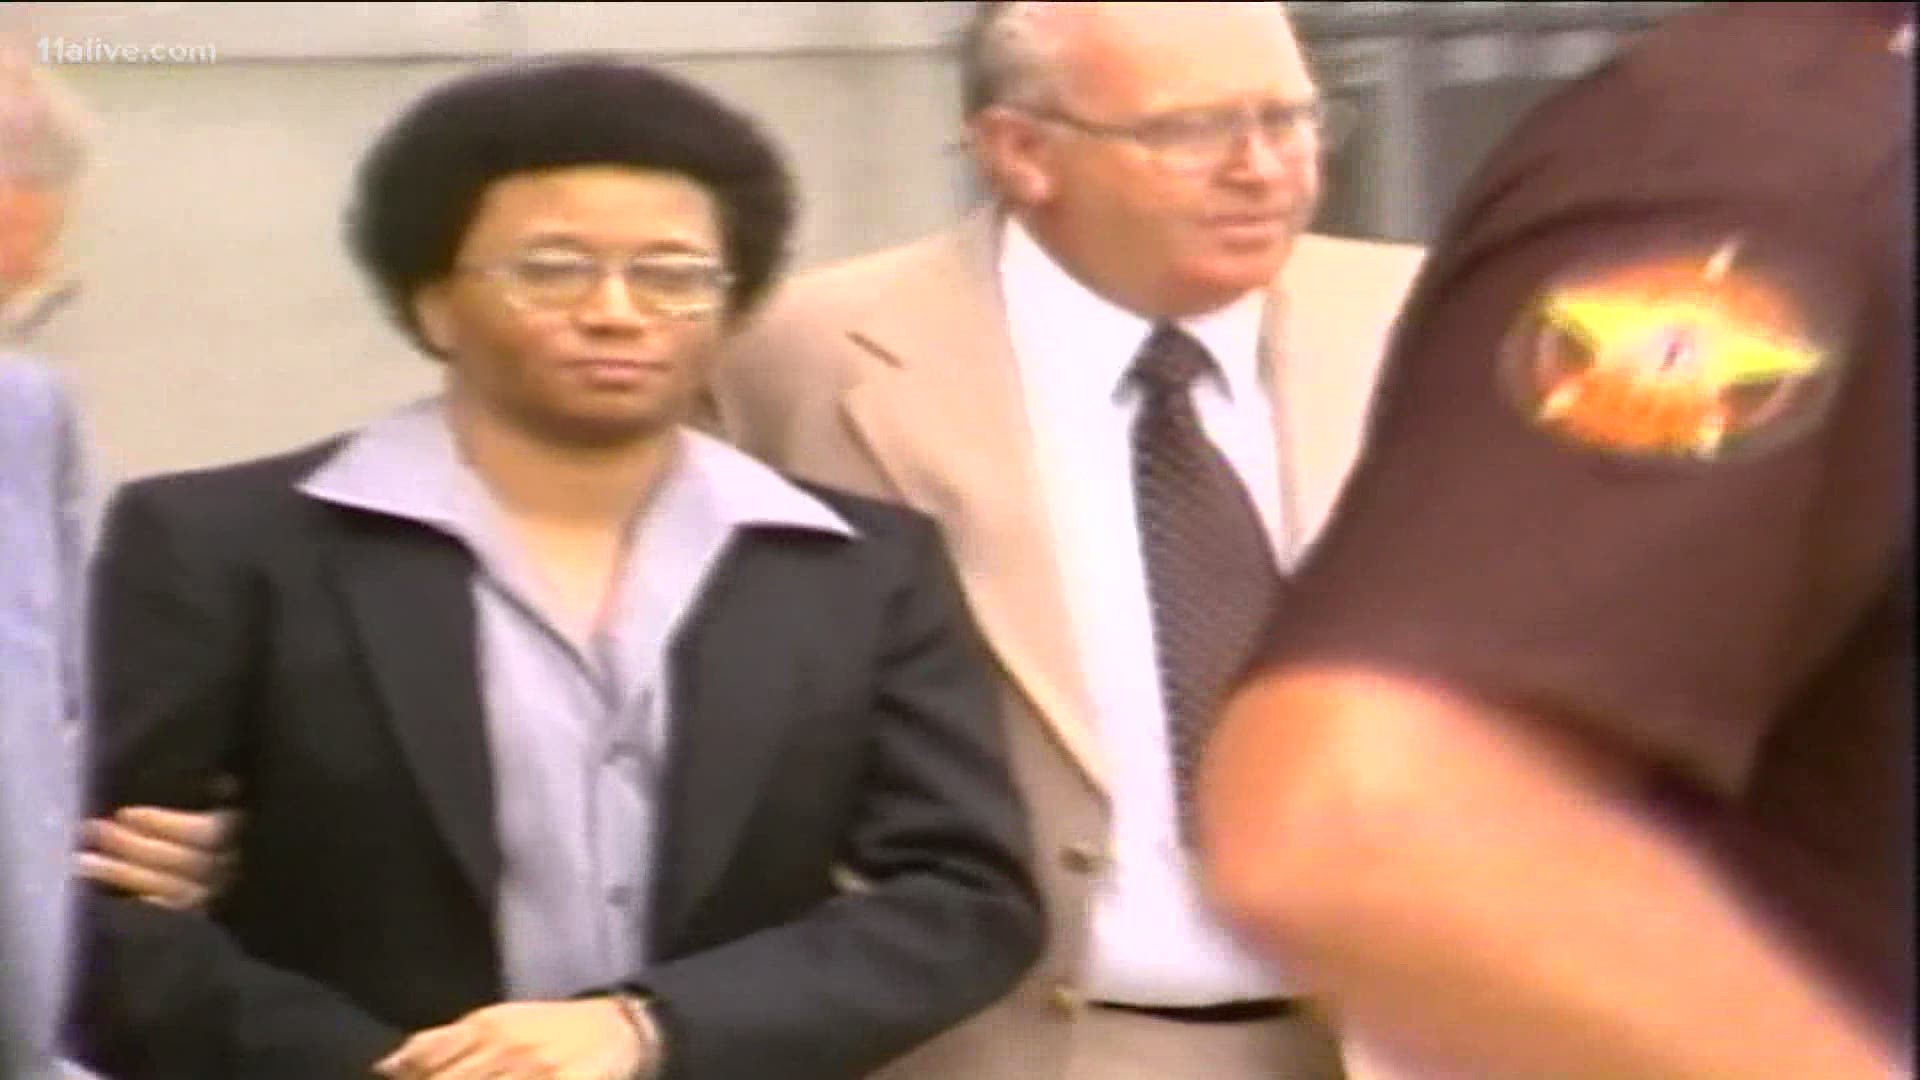 The next date Wayne Williams will be considered for parole is November 2027.